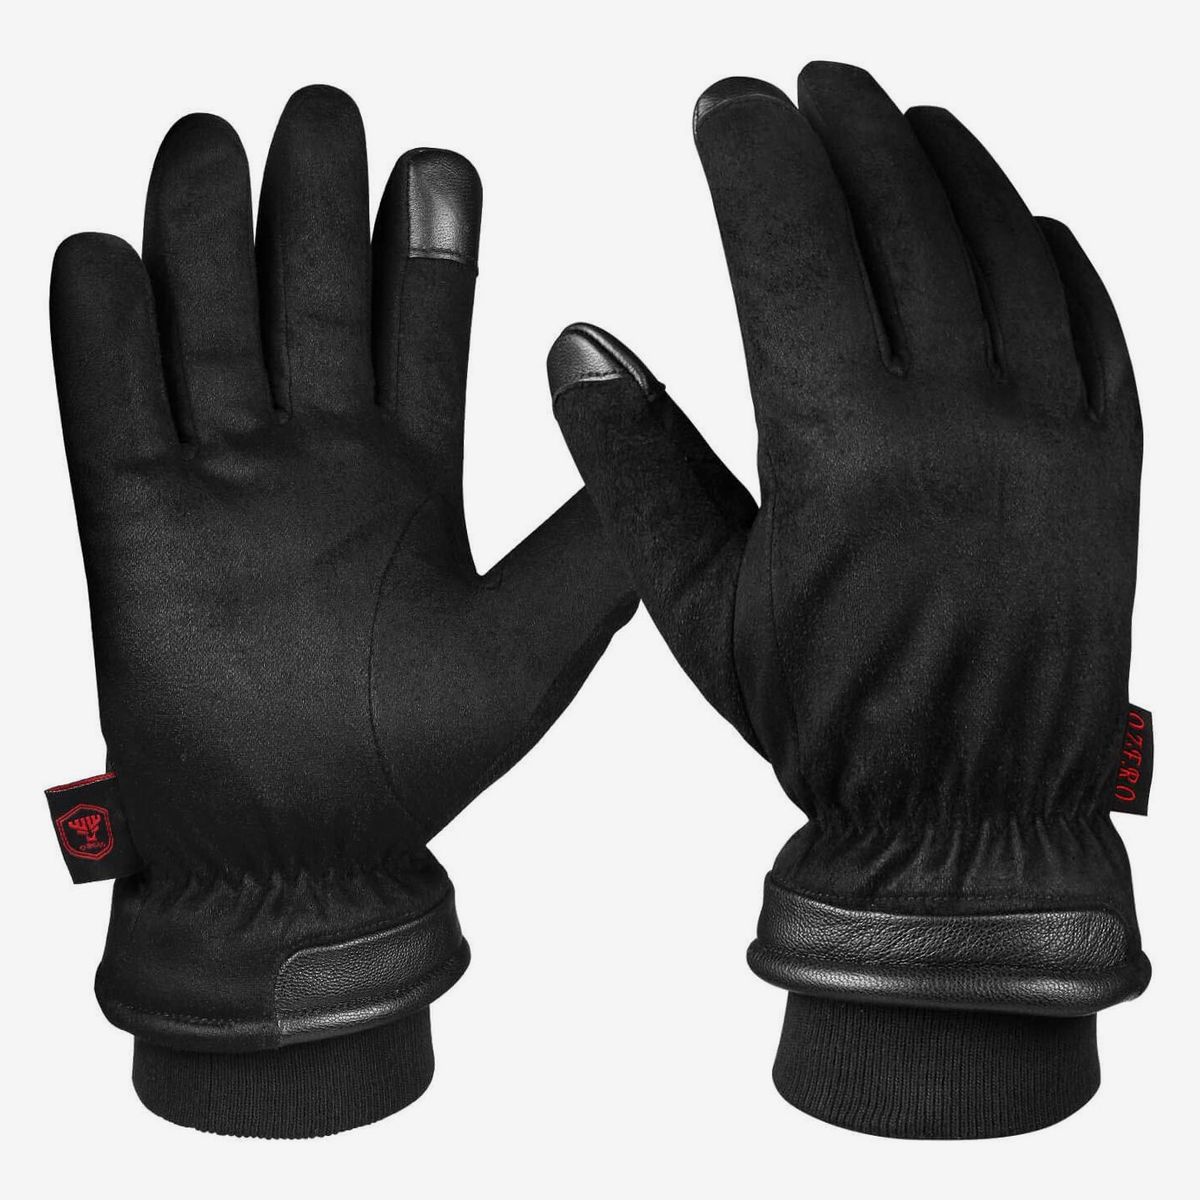 HOT Mens Cashmere Leather Winter Gloves Driving Super Warm Gloves Mittens Gifts